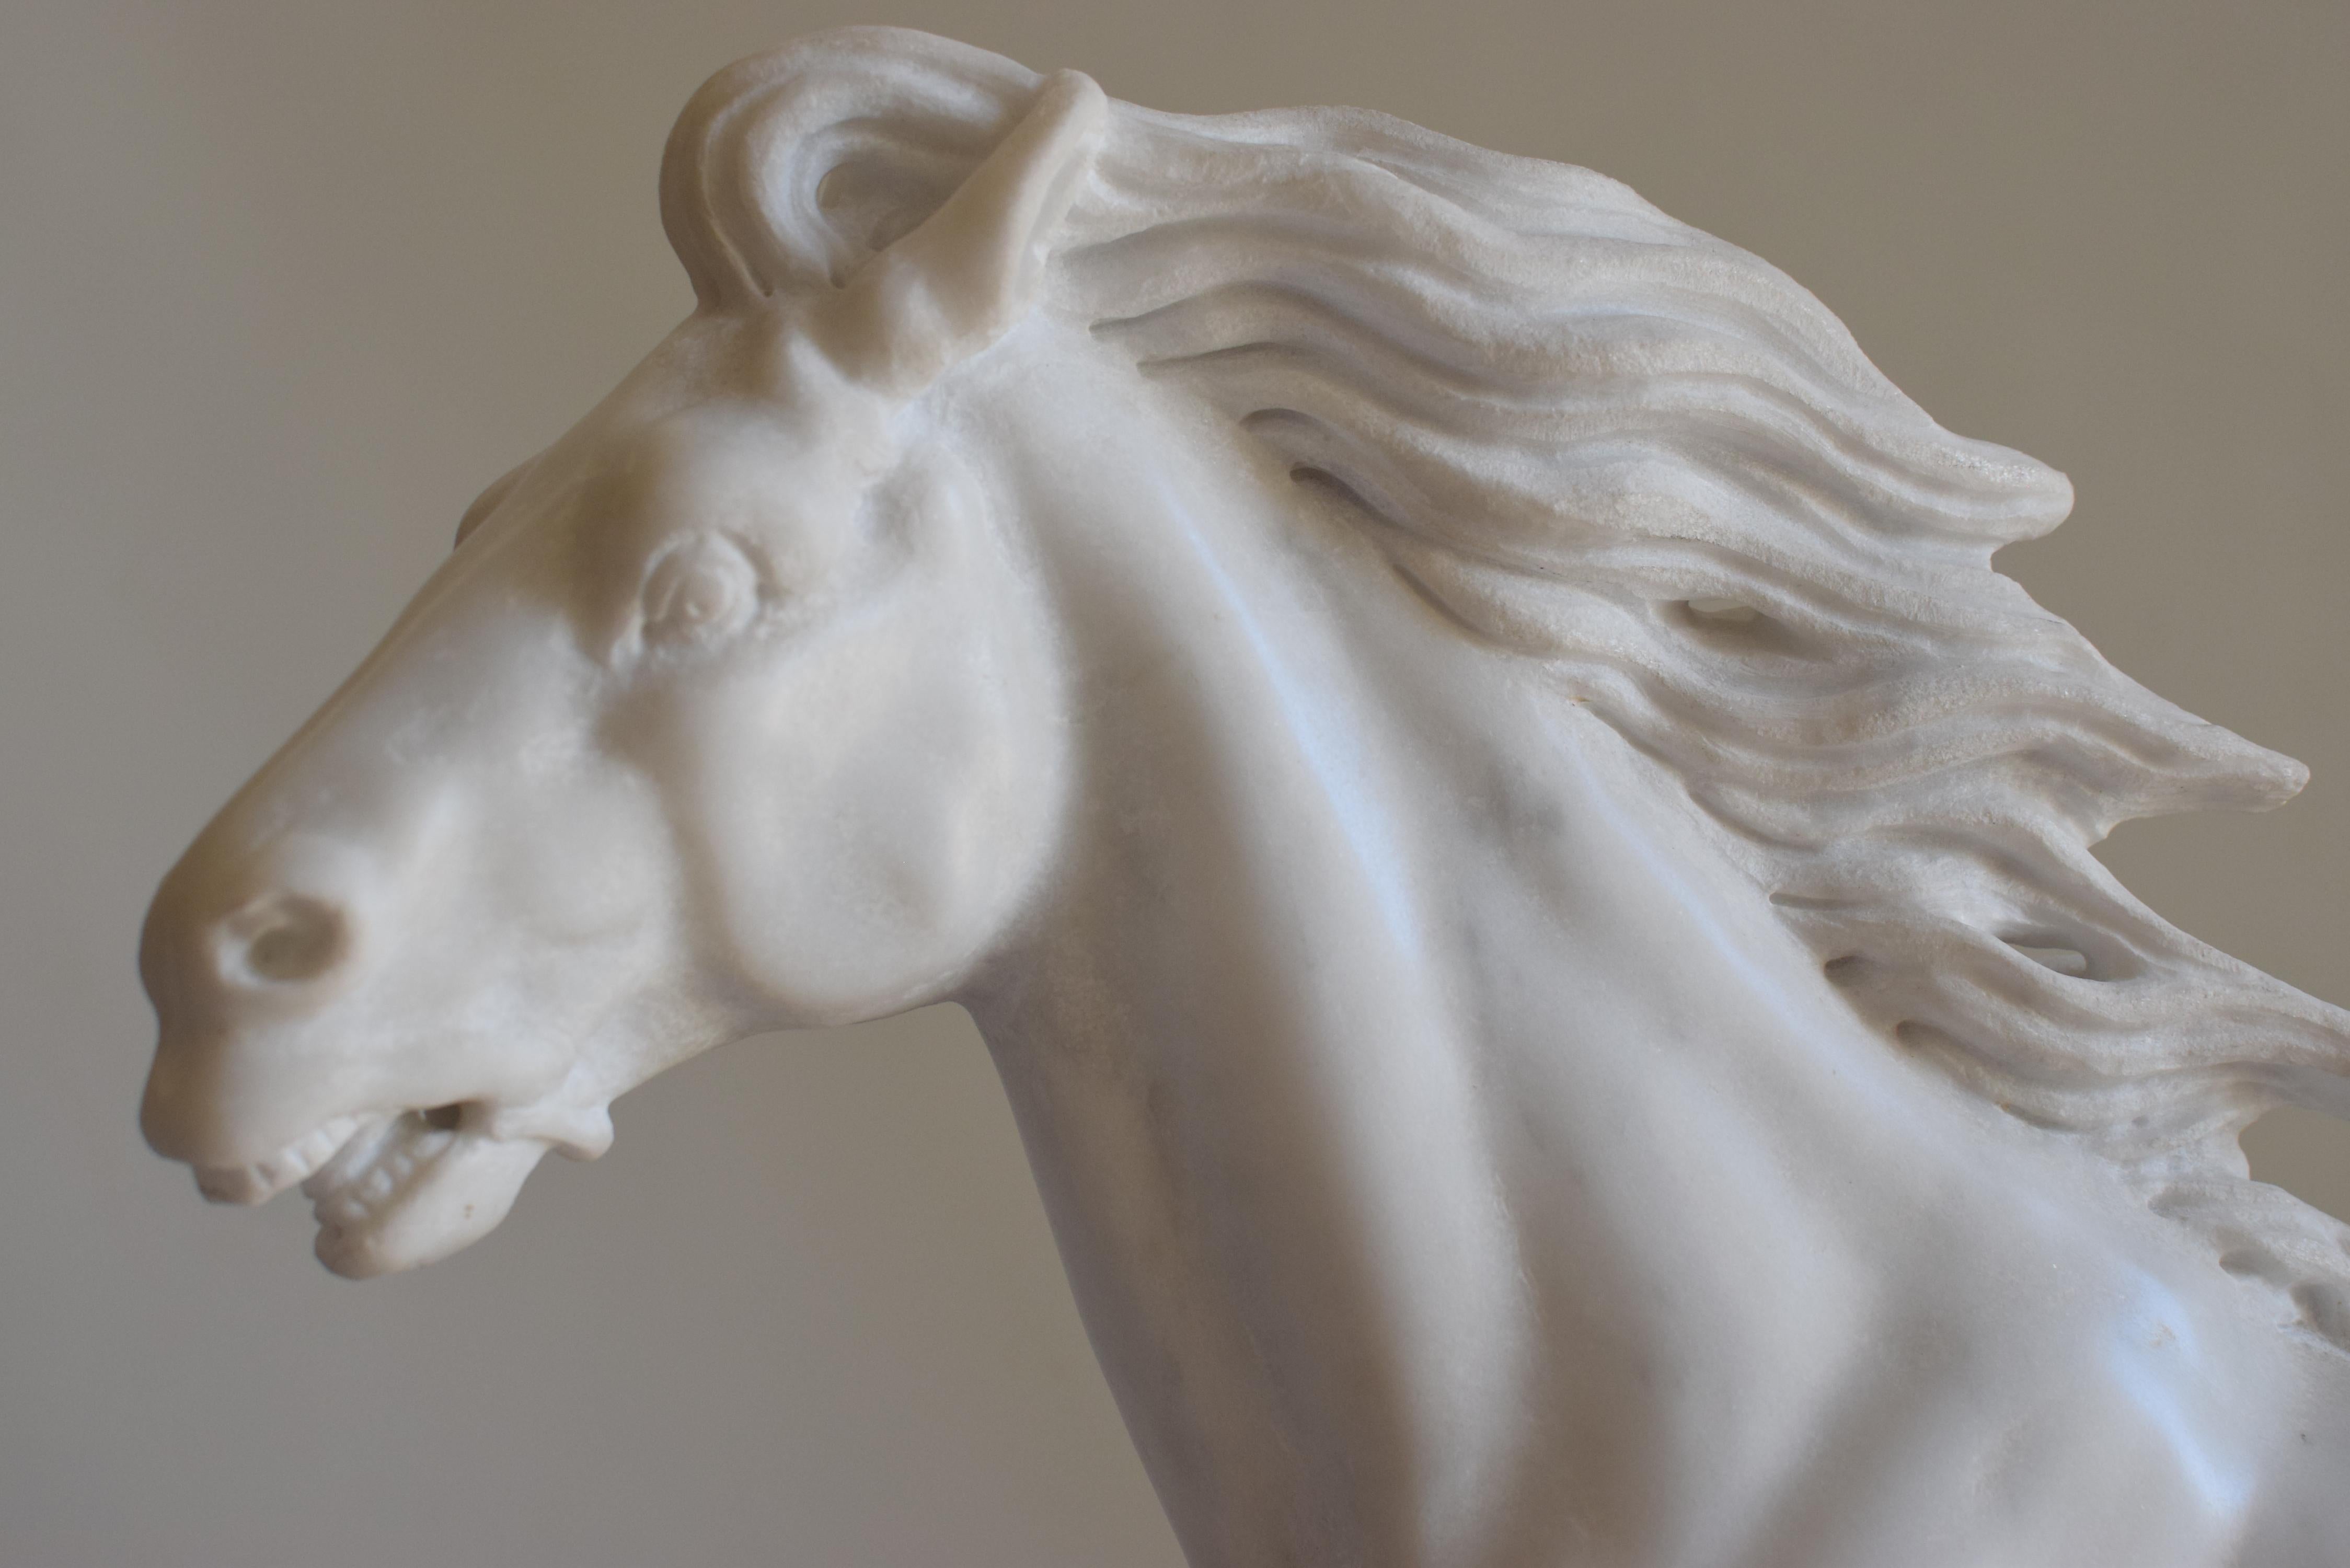 Horse, running horse, horse sculpture, marble horse,
Italian sculpture, made in Italy, white marble horse.
Valuable sculpture representing a running horse.
Carved on white Carrara marble in the Todini workshop in Tarquinia, Italy.
In very good